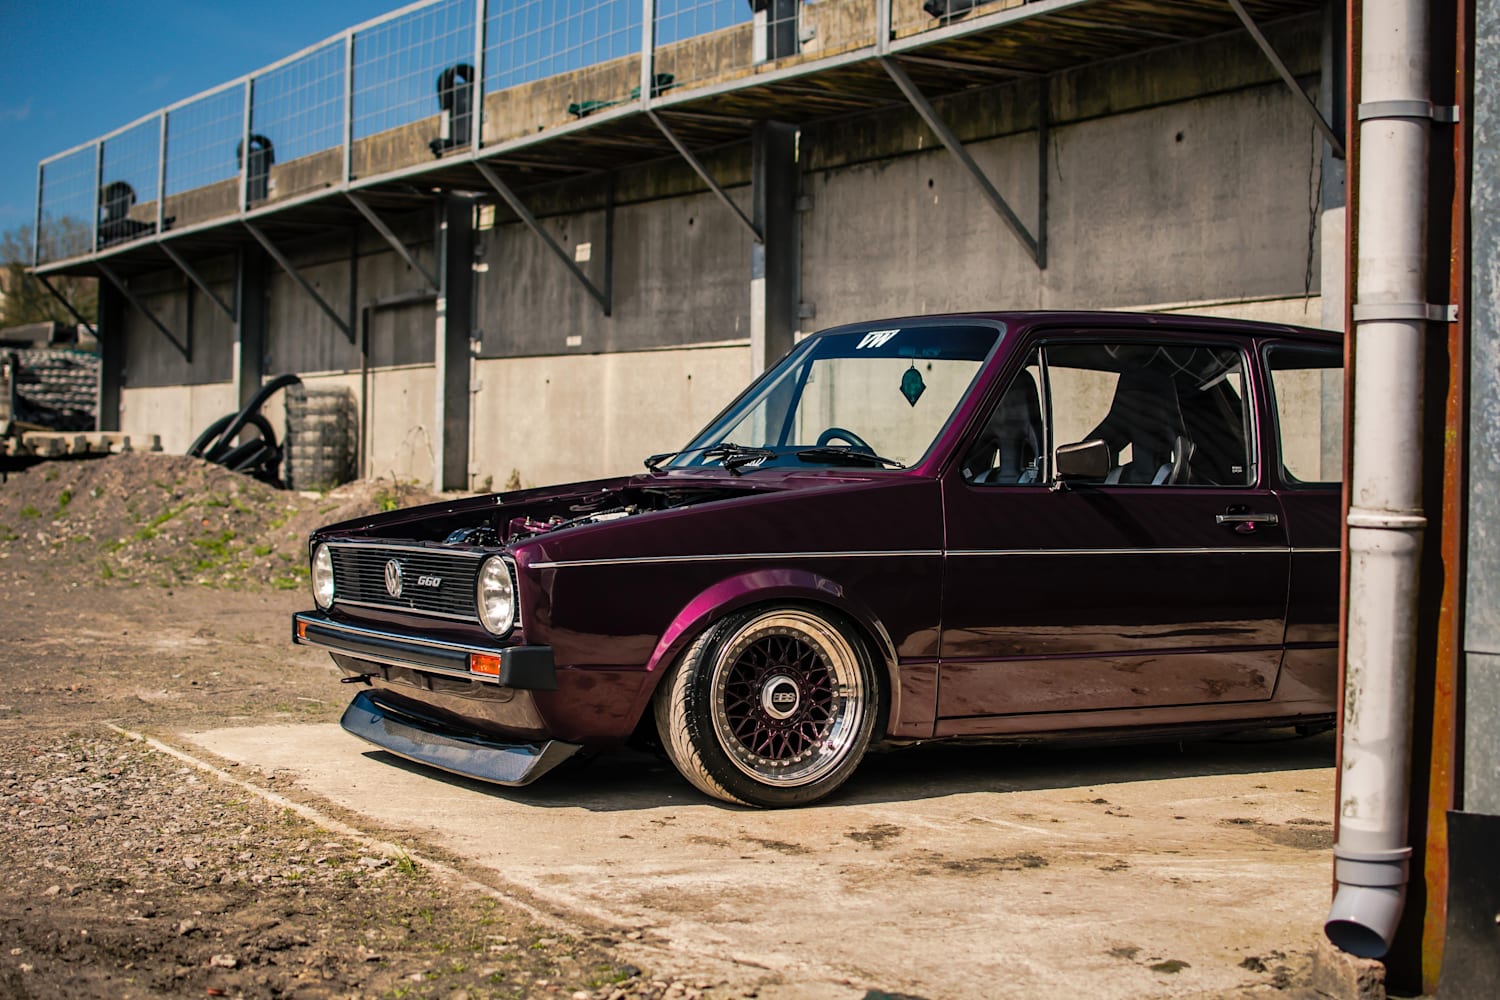 Modified MK1 Golf G60 Go inside this modified beauty